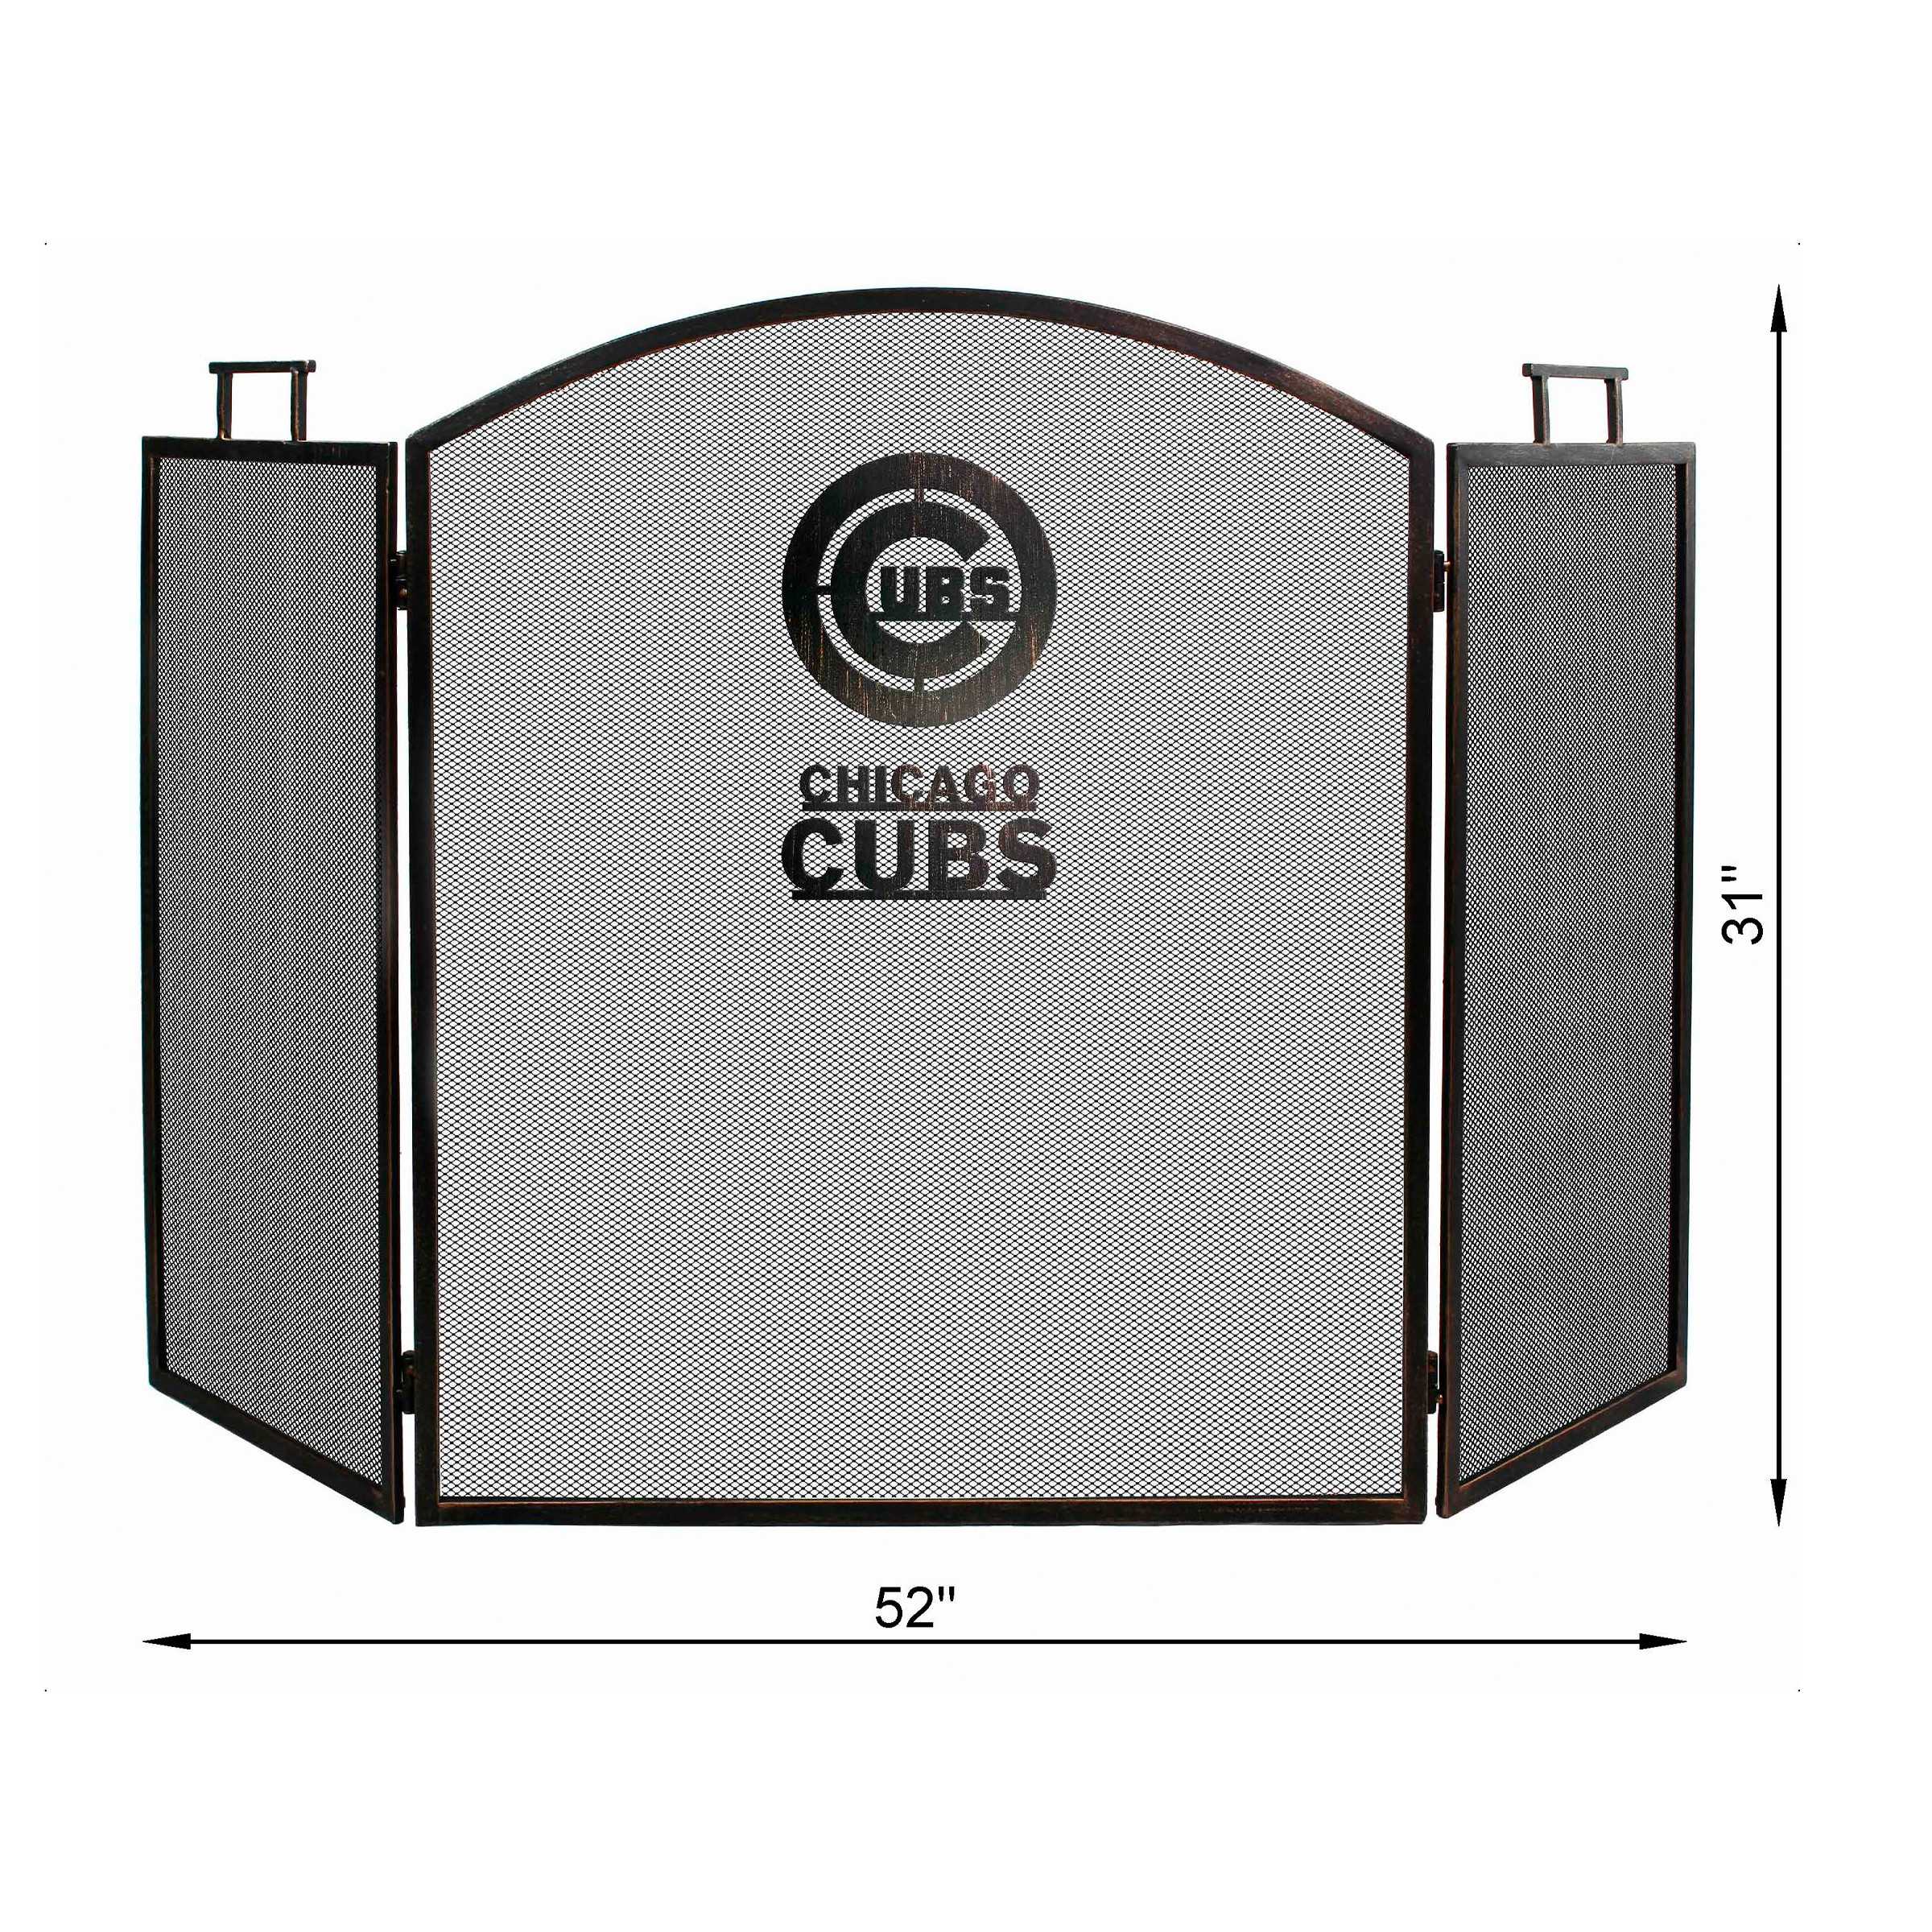 Chicago Cubs Fireplace Screen